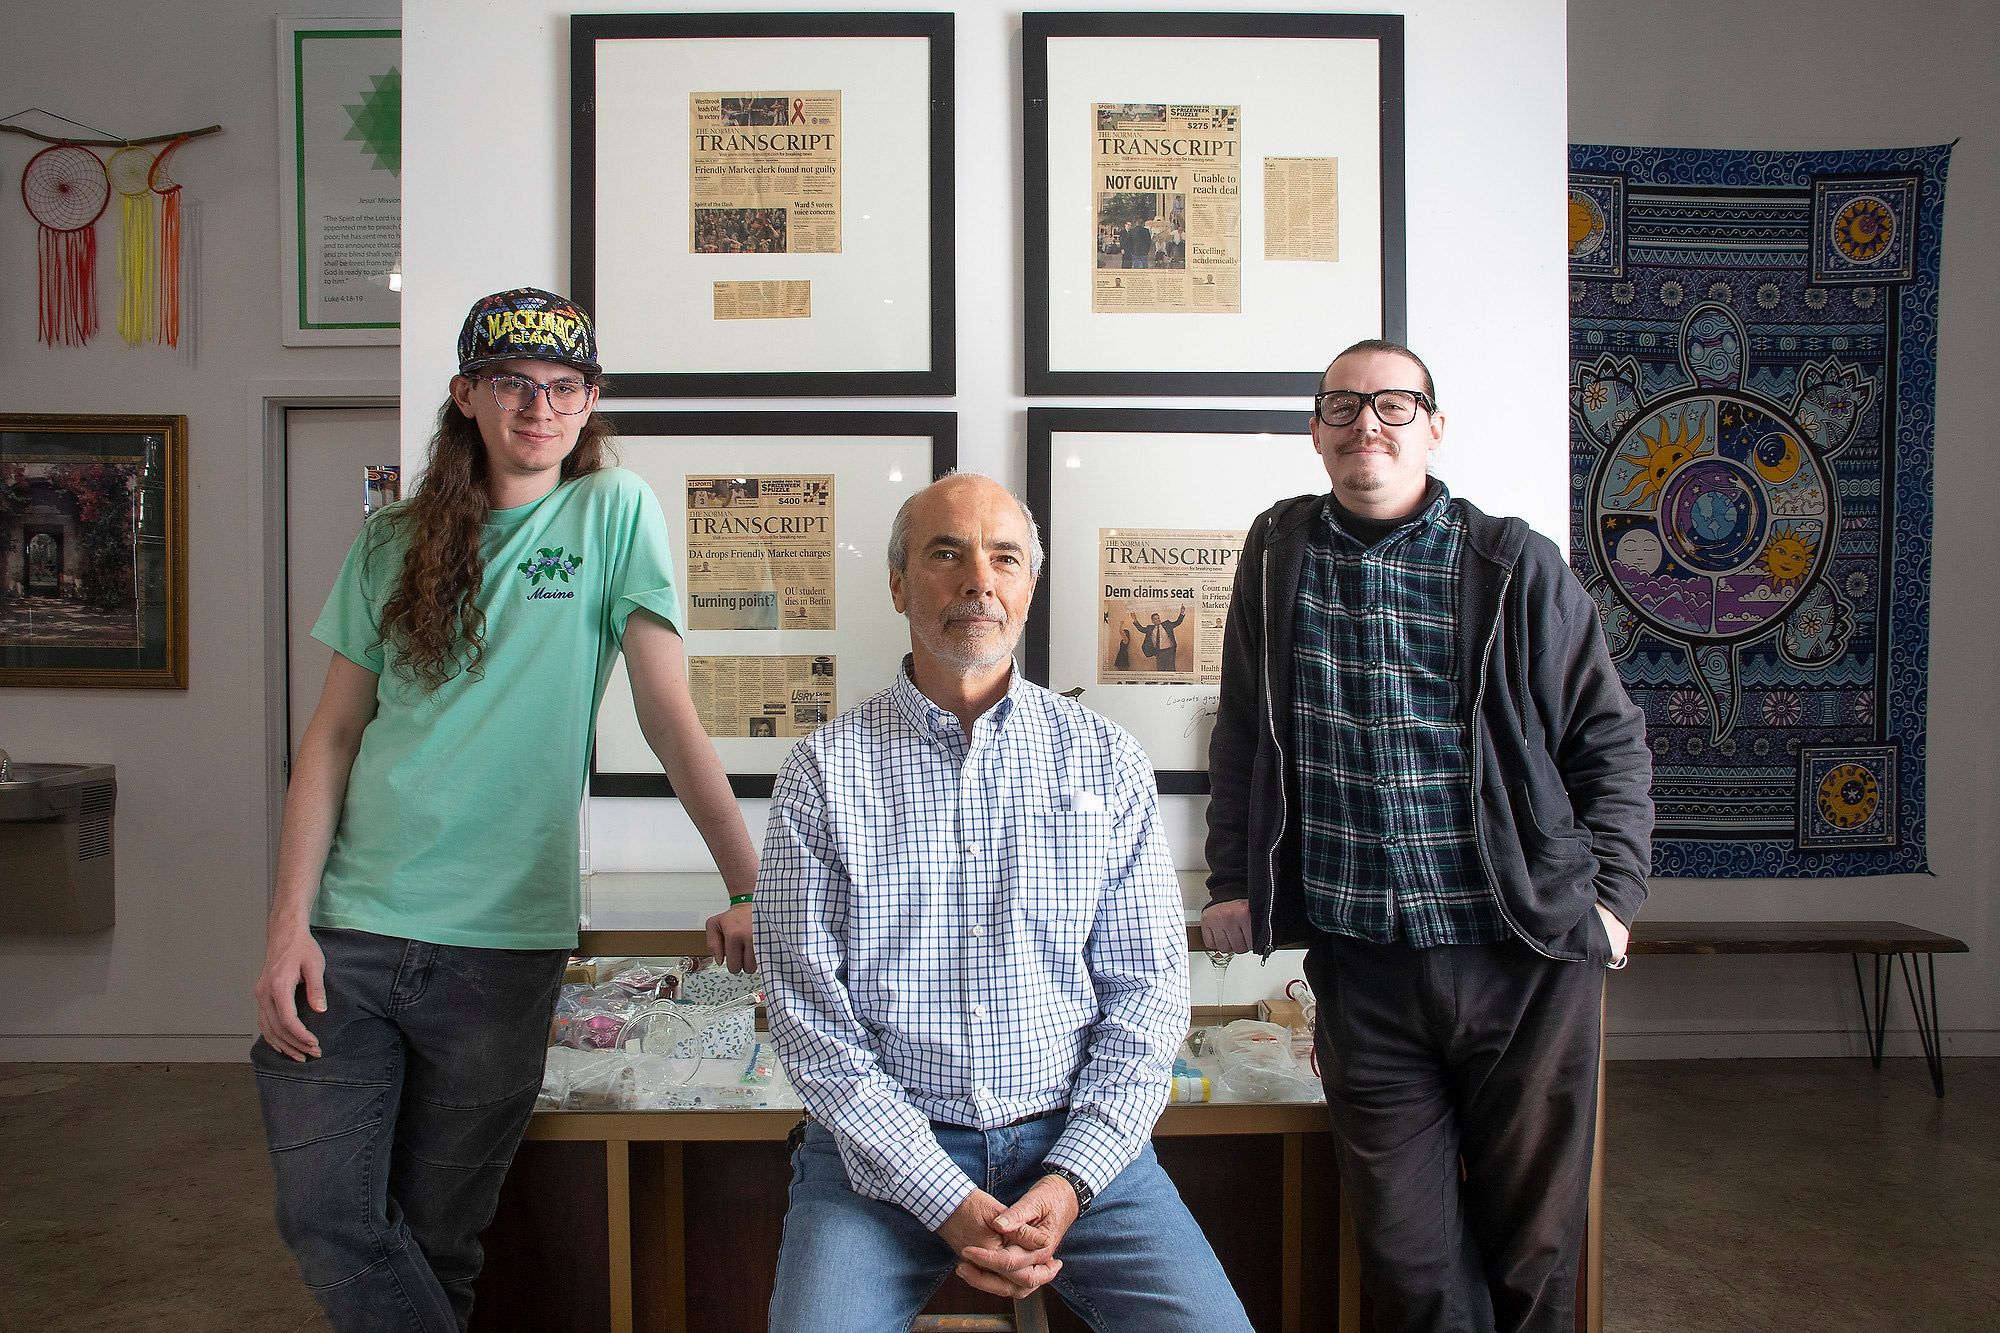 Left to right: The Friendly Market’s Max Walters, Robert Cox and Stephen Holman stand in front of a display of memorabilia documenting their succesful two-year legal battle over criminal charges for allegedly selling drug paraphernalia prior to the legalization of medical marijuana in Oklahoma.